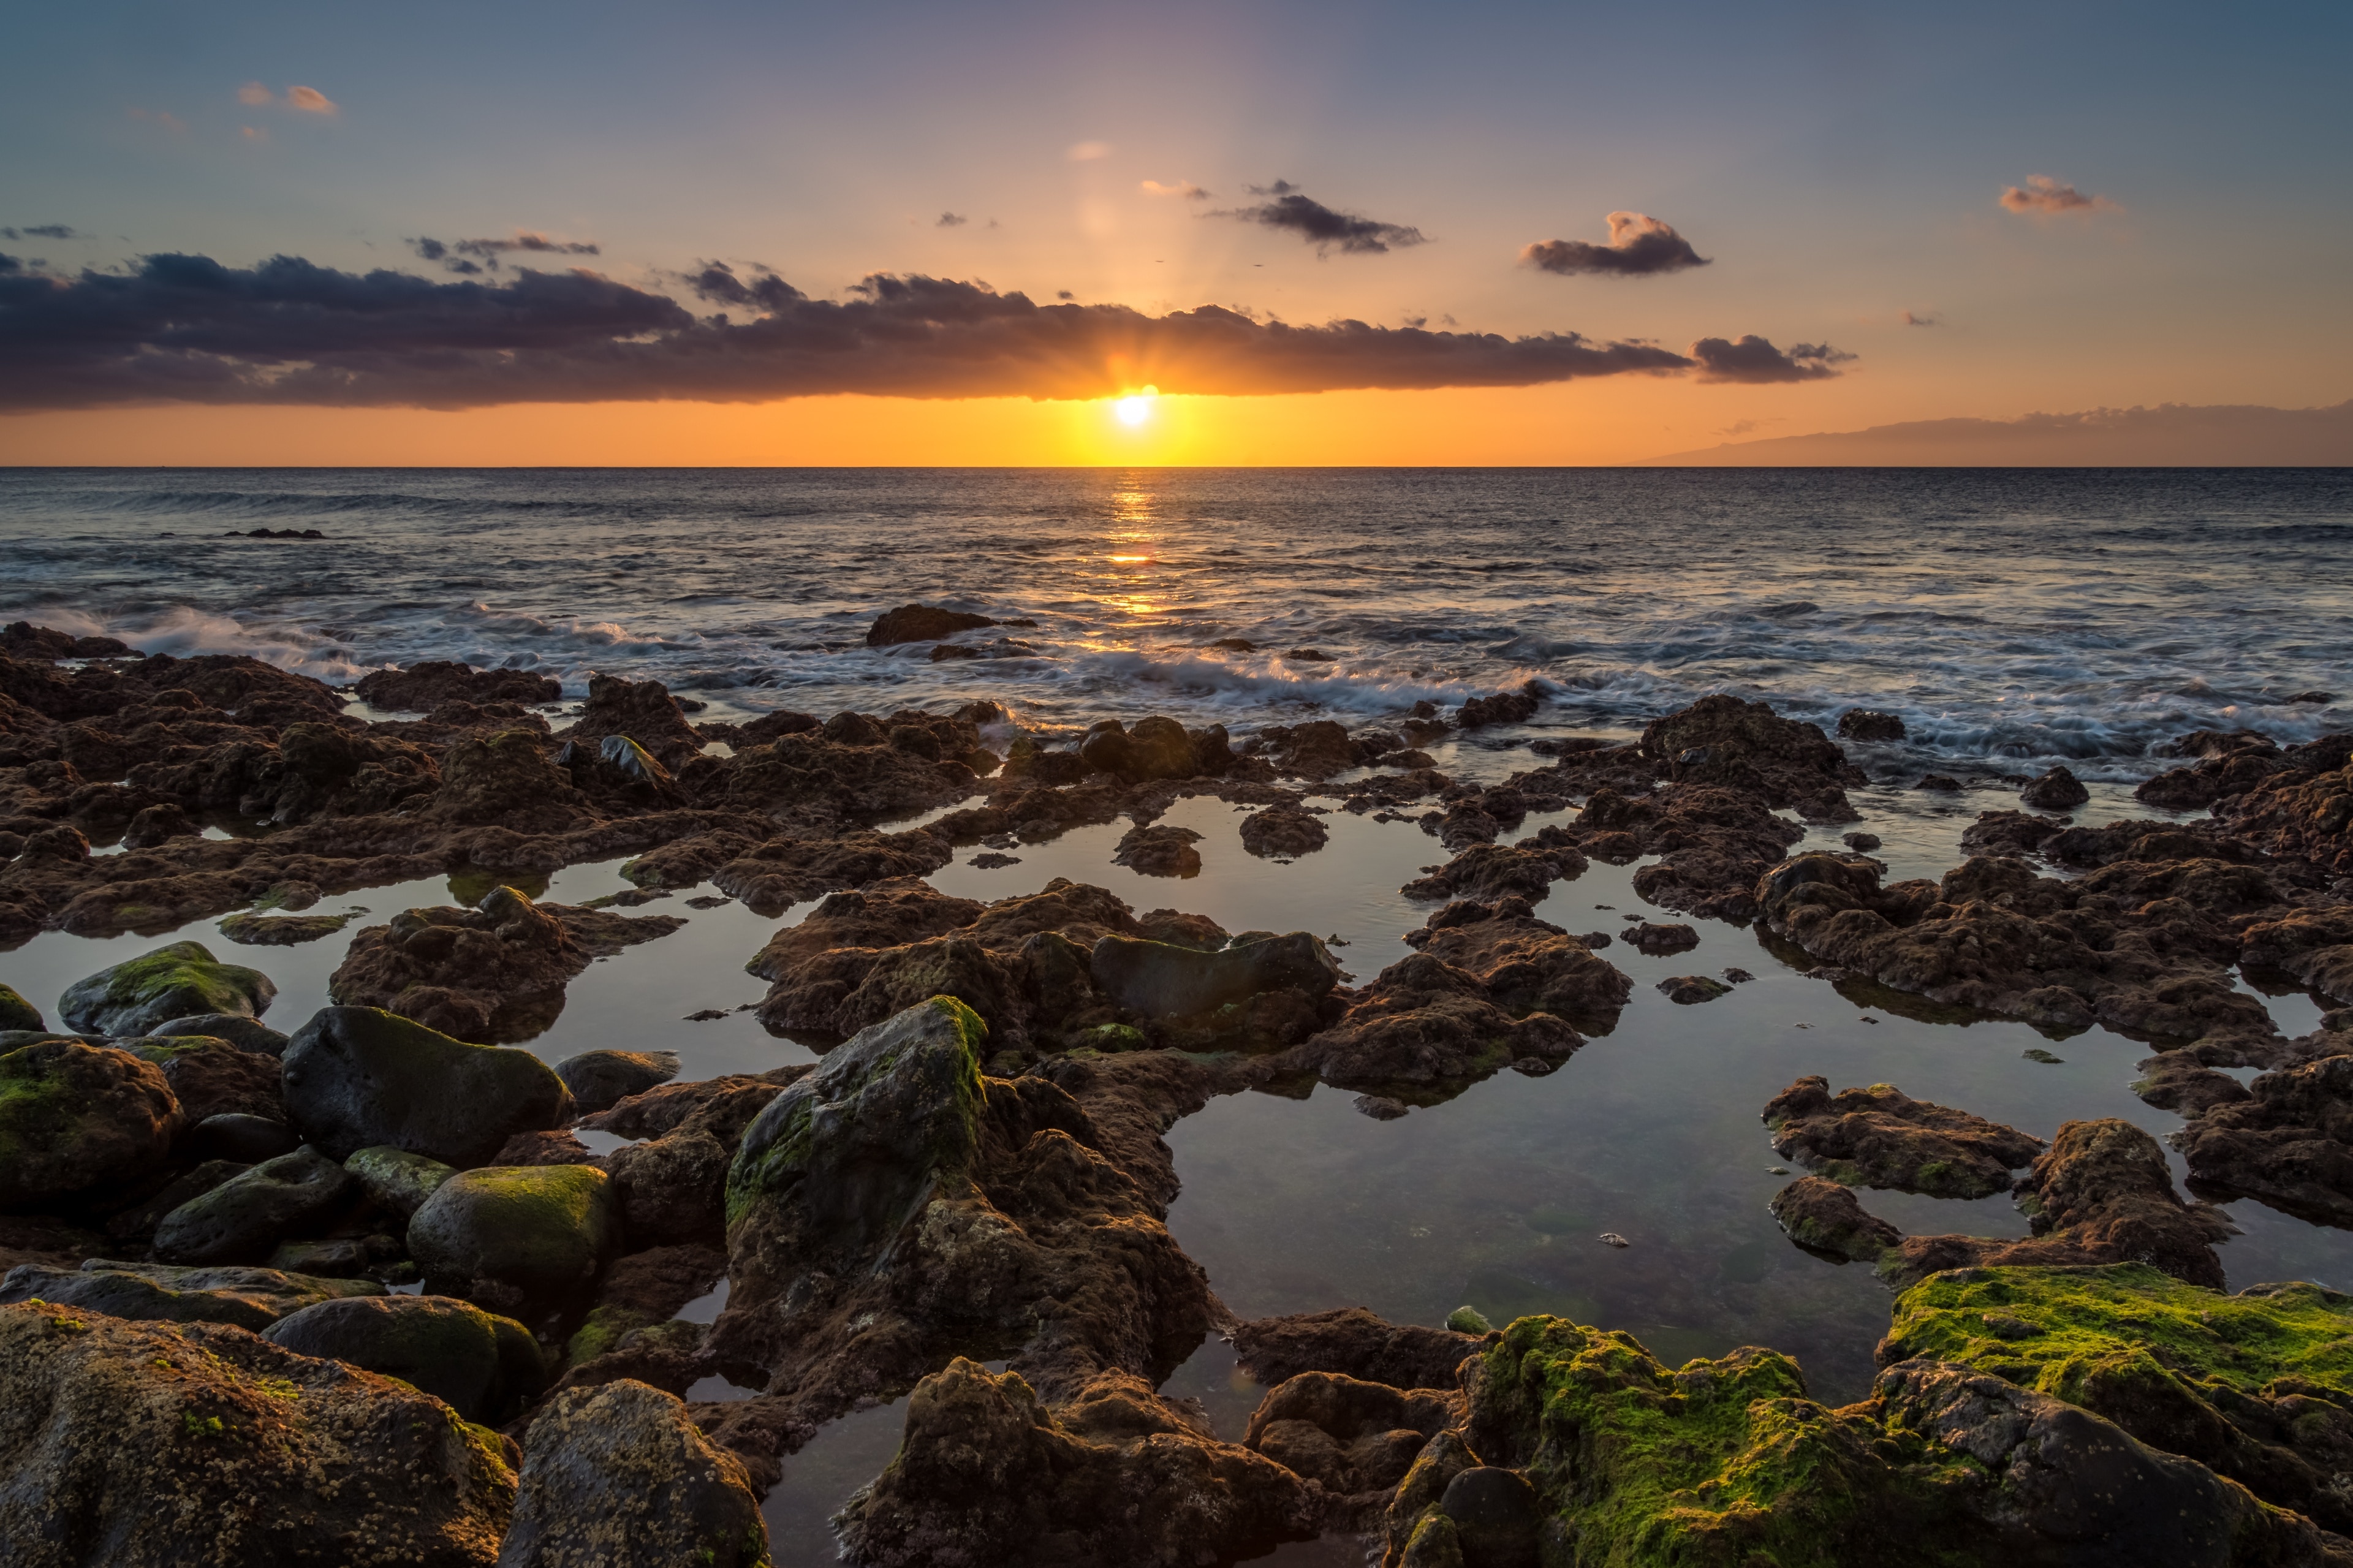 Nice rocky beach, great opportunity for sunset photography 
#BeachTips #BvS